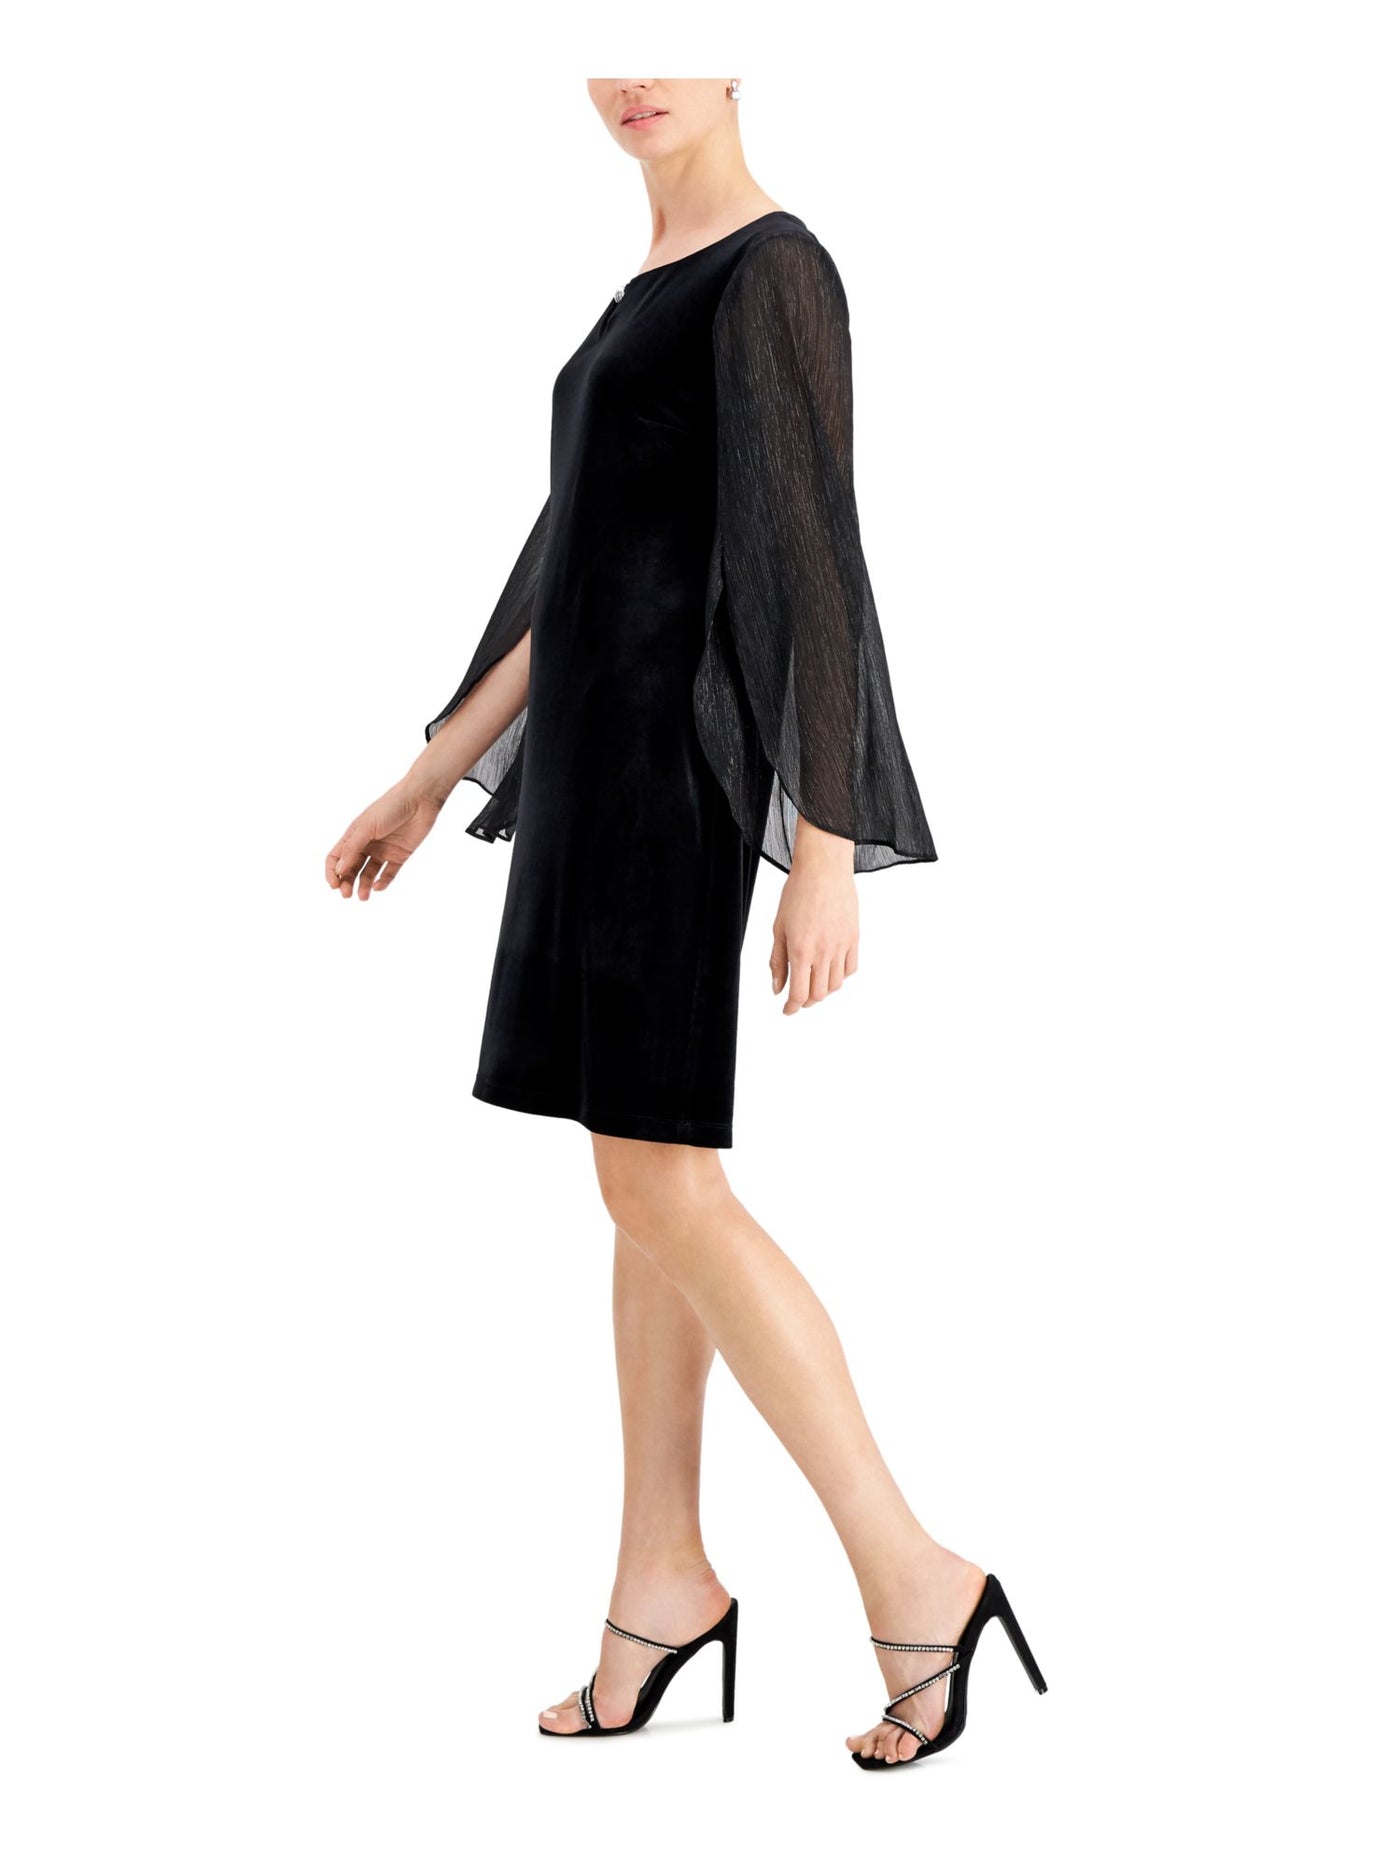 CONNECTED APPAREL Womens Black Stretch Embellished Long Angel Sleeves Keyhole Above The Knee Cocktail Sheath Dress 4